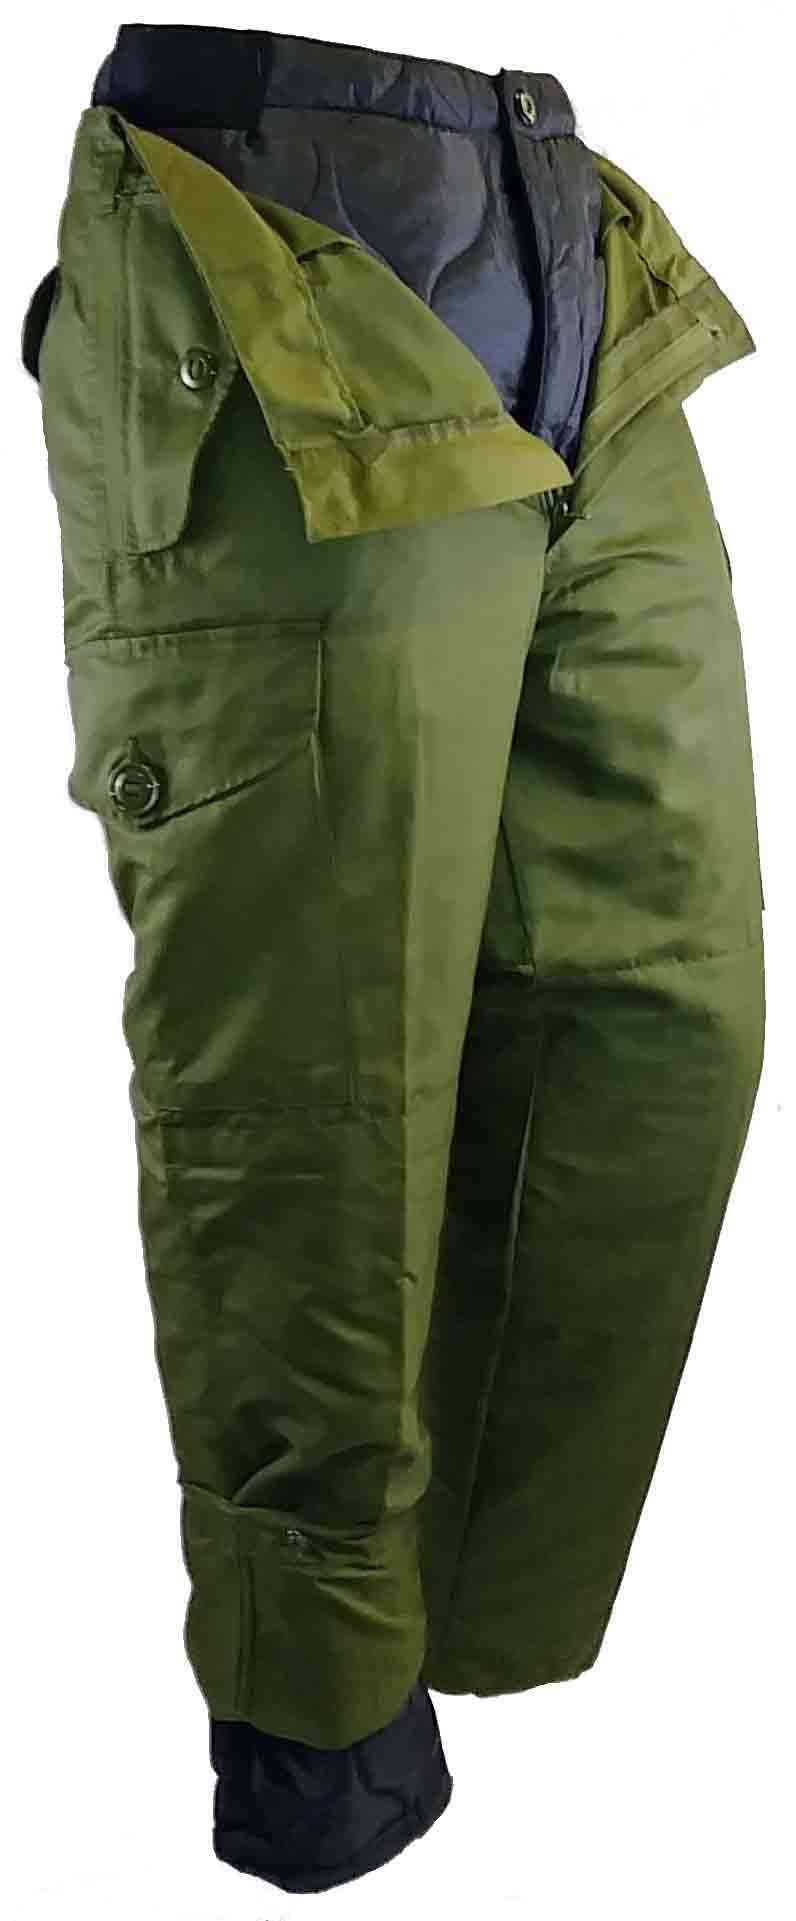 Wind proof combat style pant with liner.